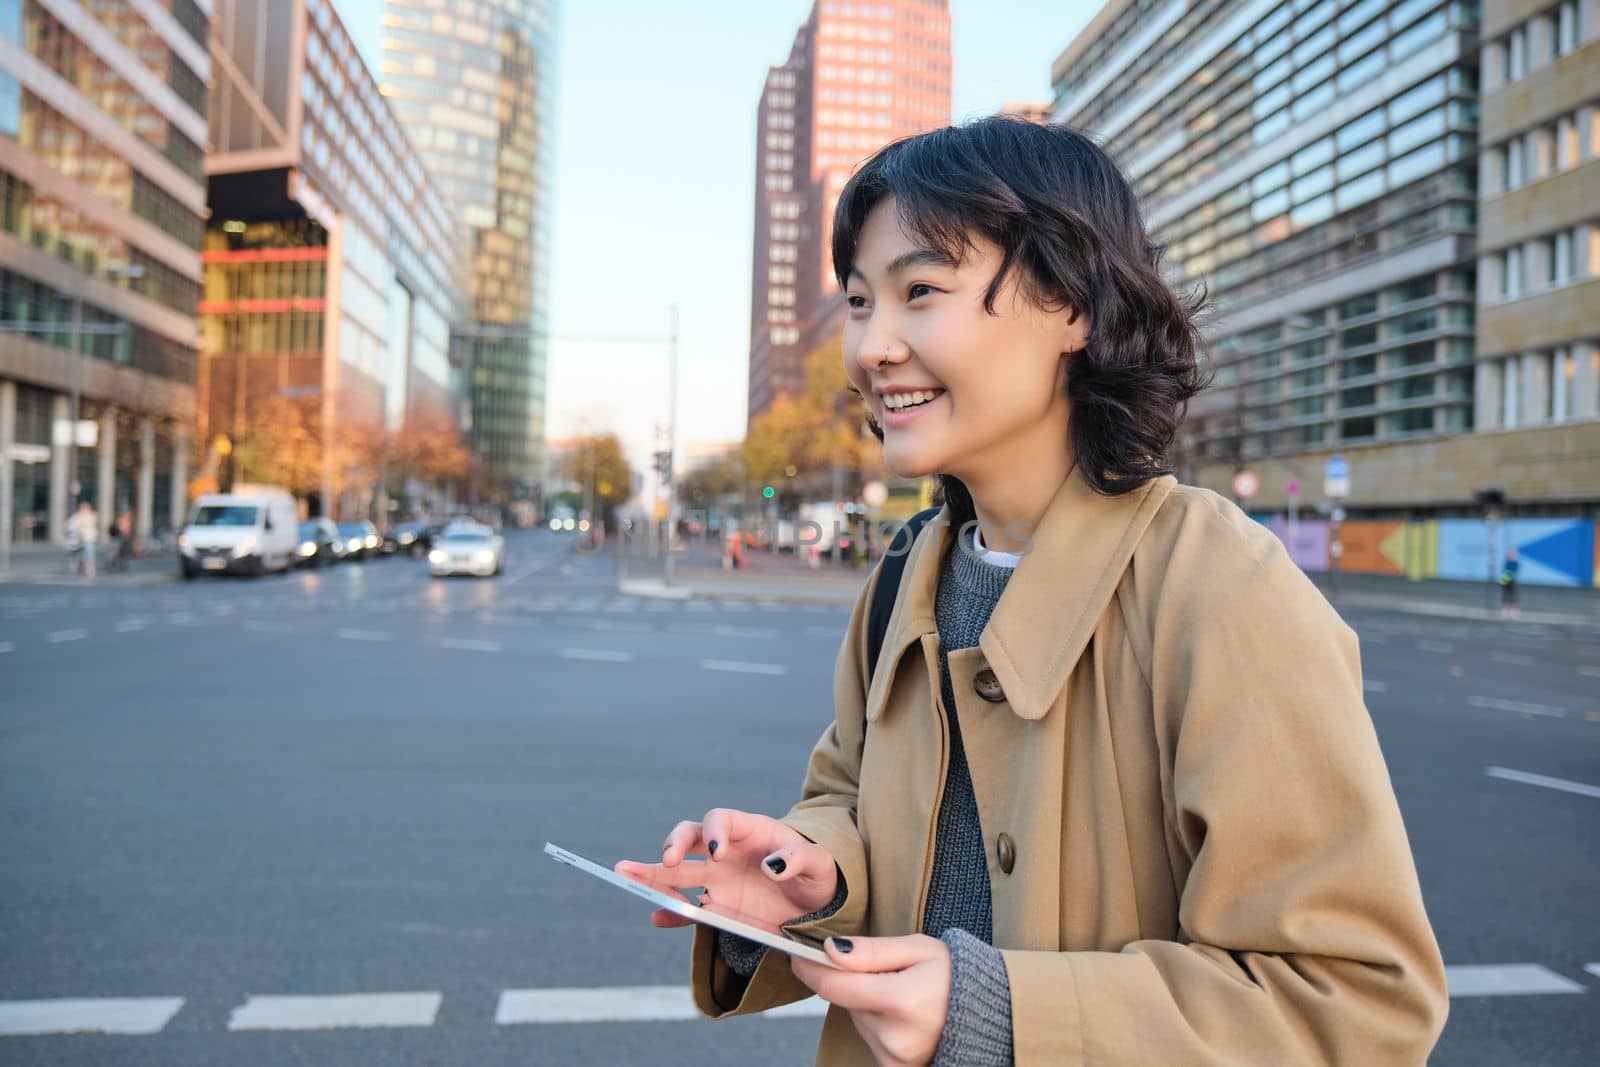 Portrait of young korean student, girl walks in city with digital tablet, stands on street, uses her gadget outdoors.